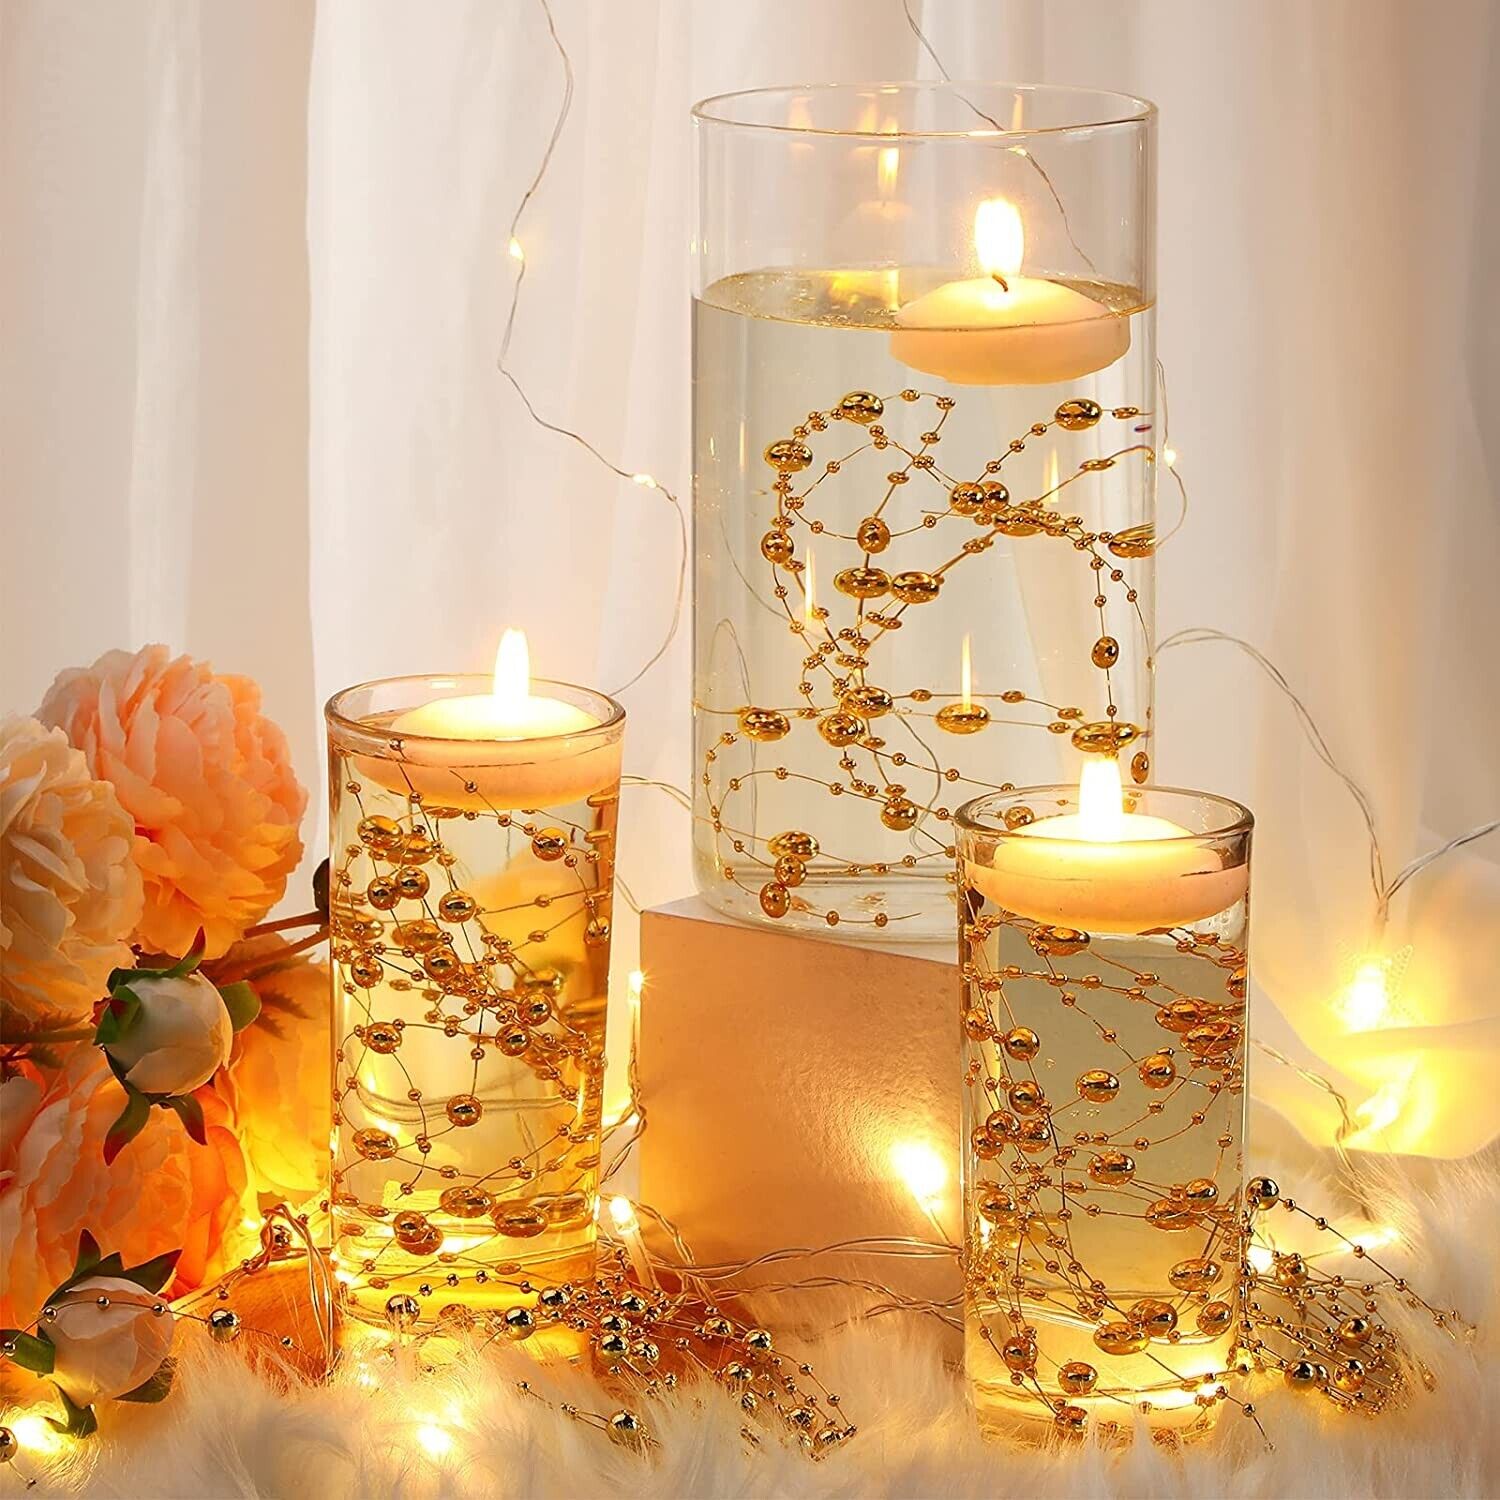 Light Up Your Evening-DIY Floating Candles Centerpiece - Learn How To Make  Soy Candles at Home